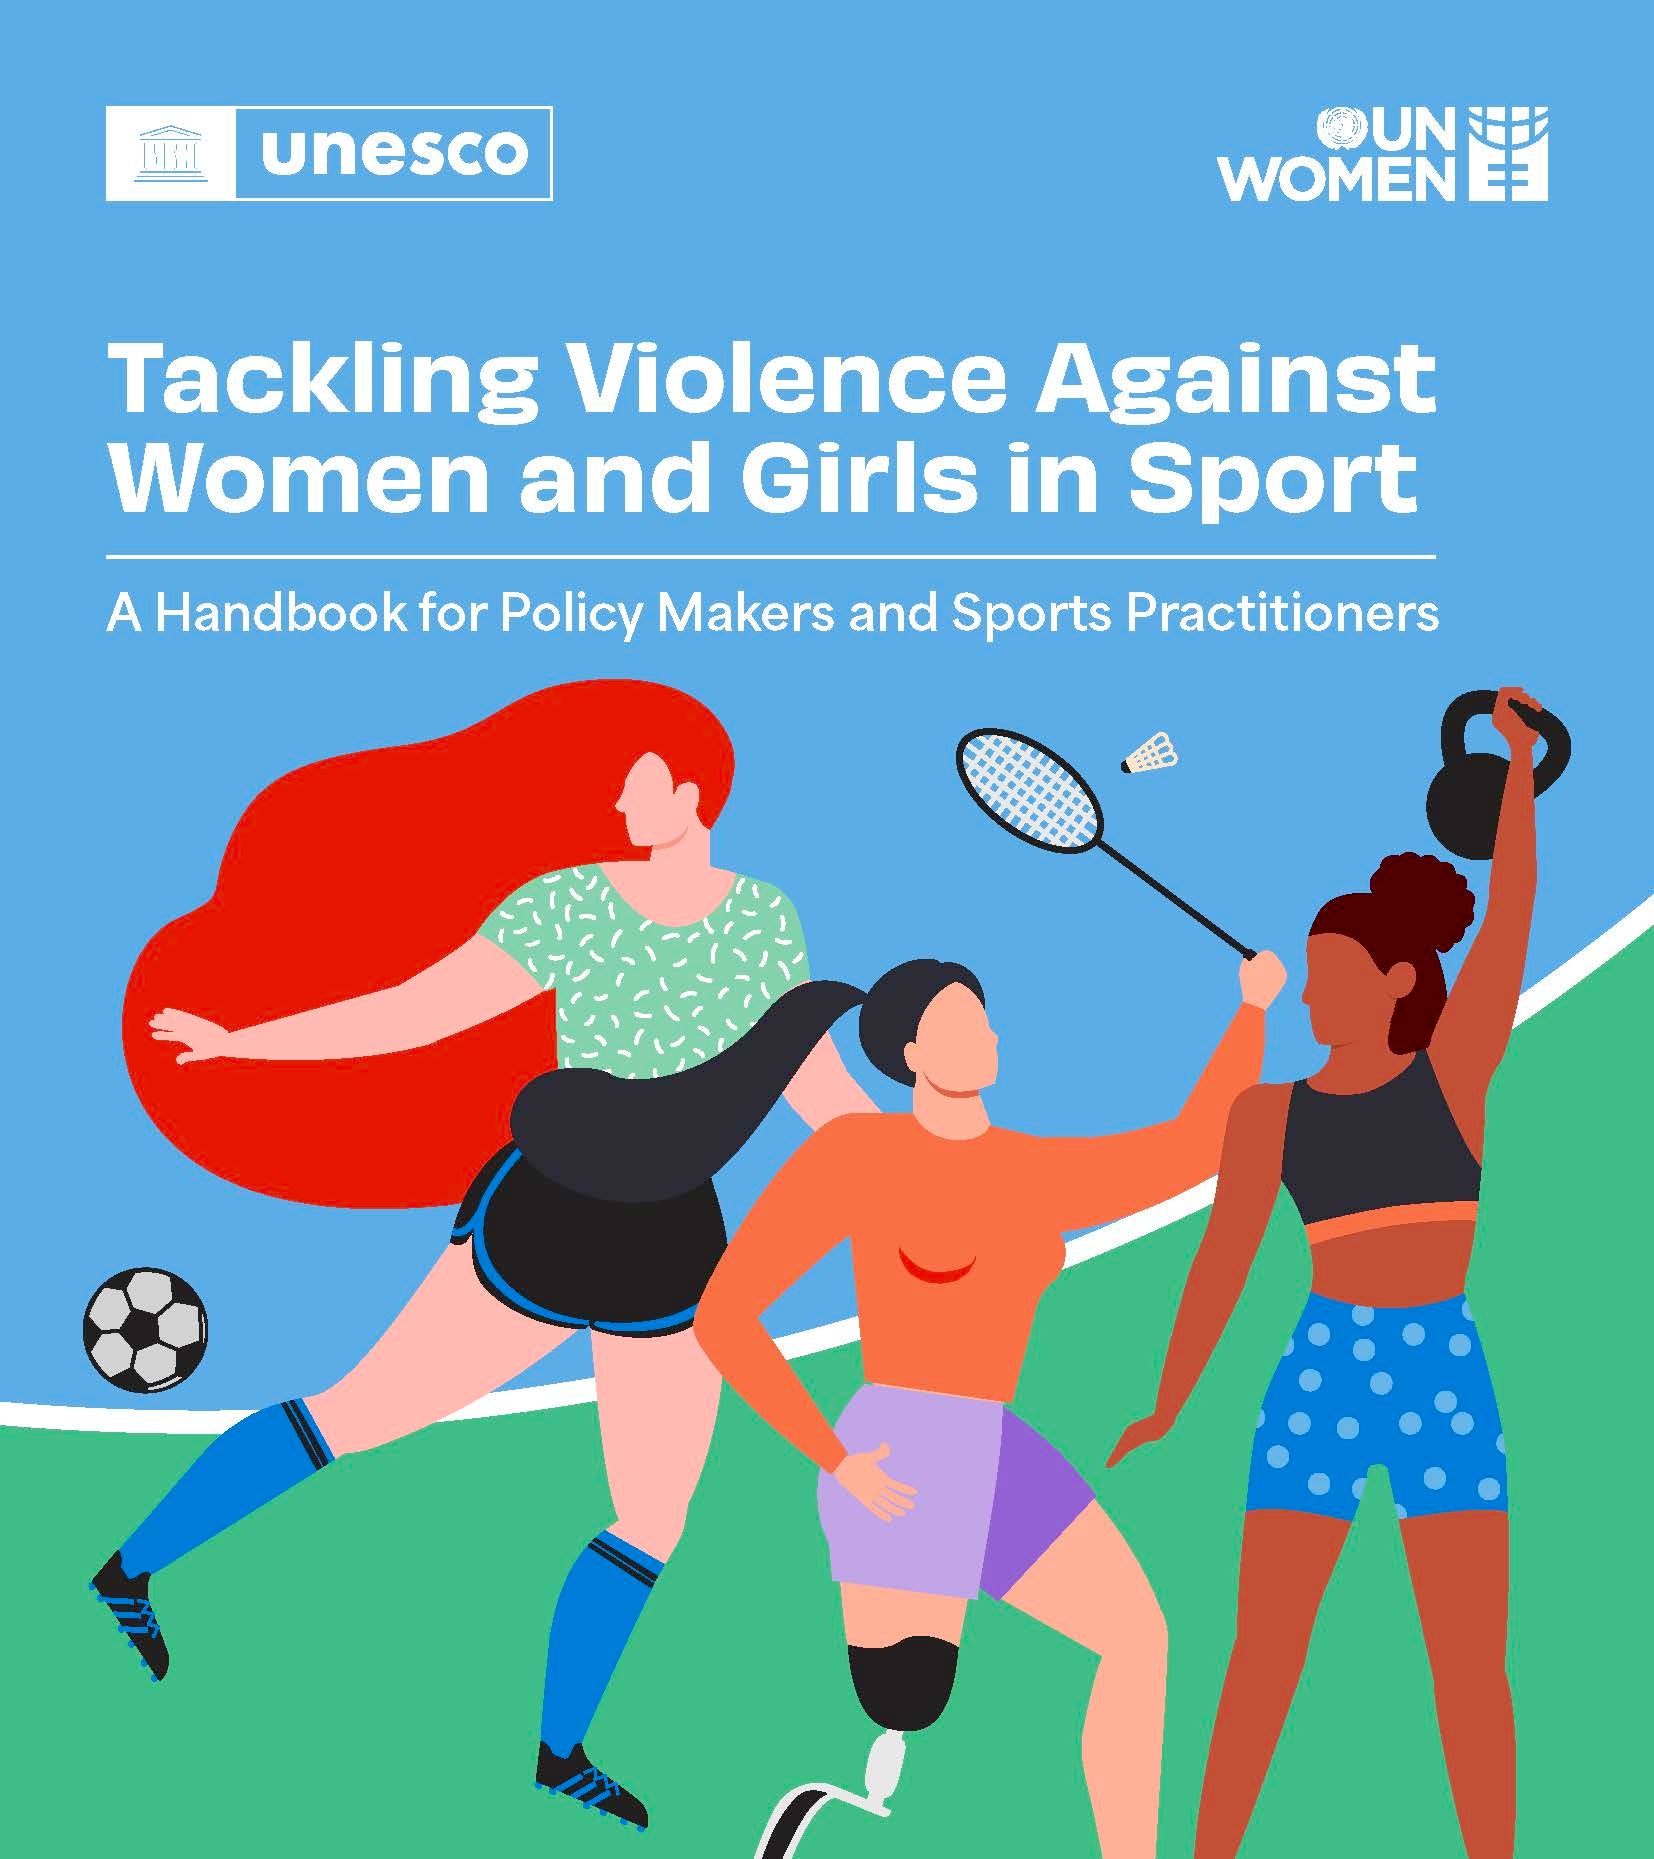 UN Women, Centre for Sport and Human Rights